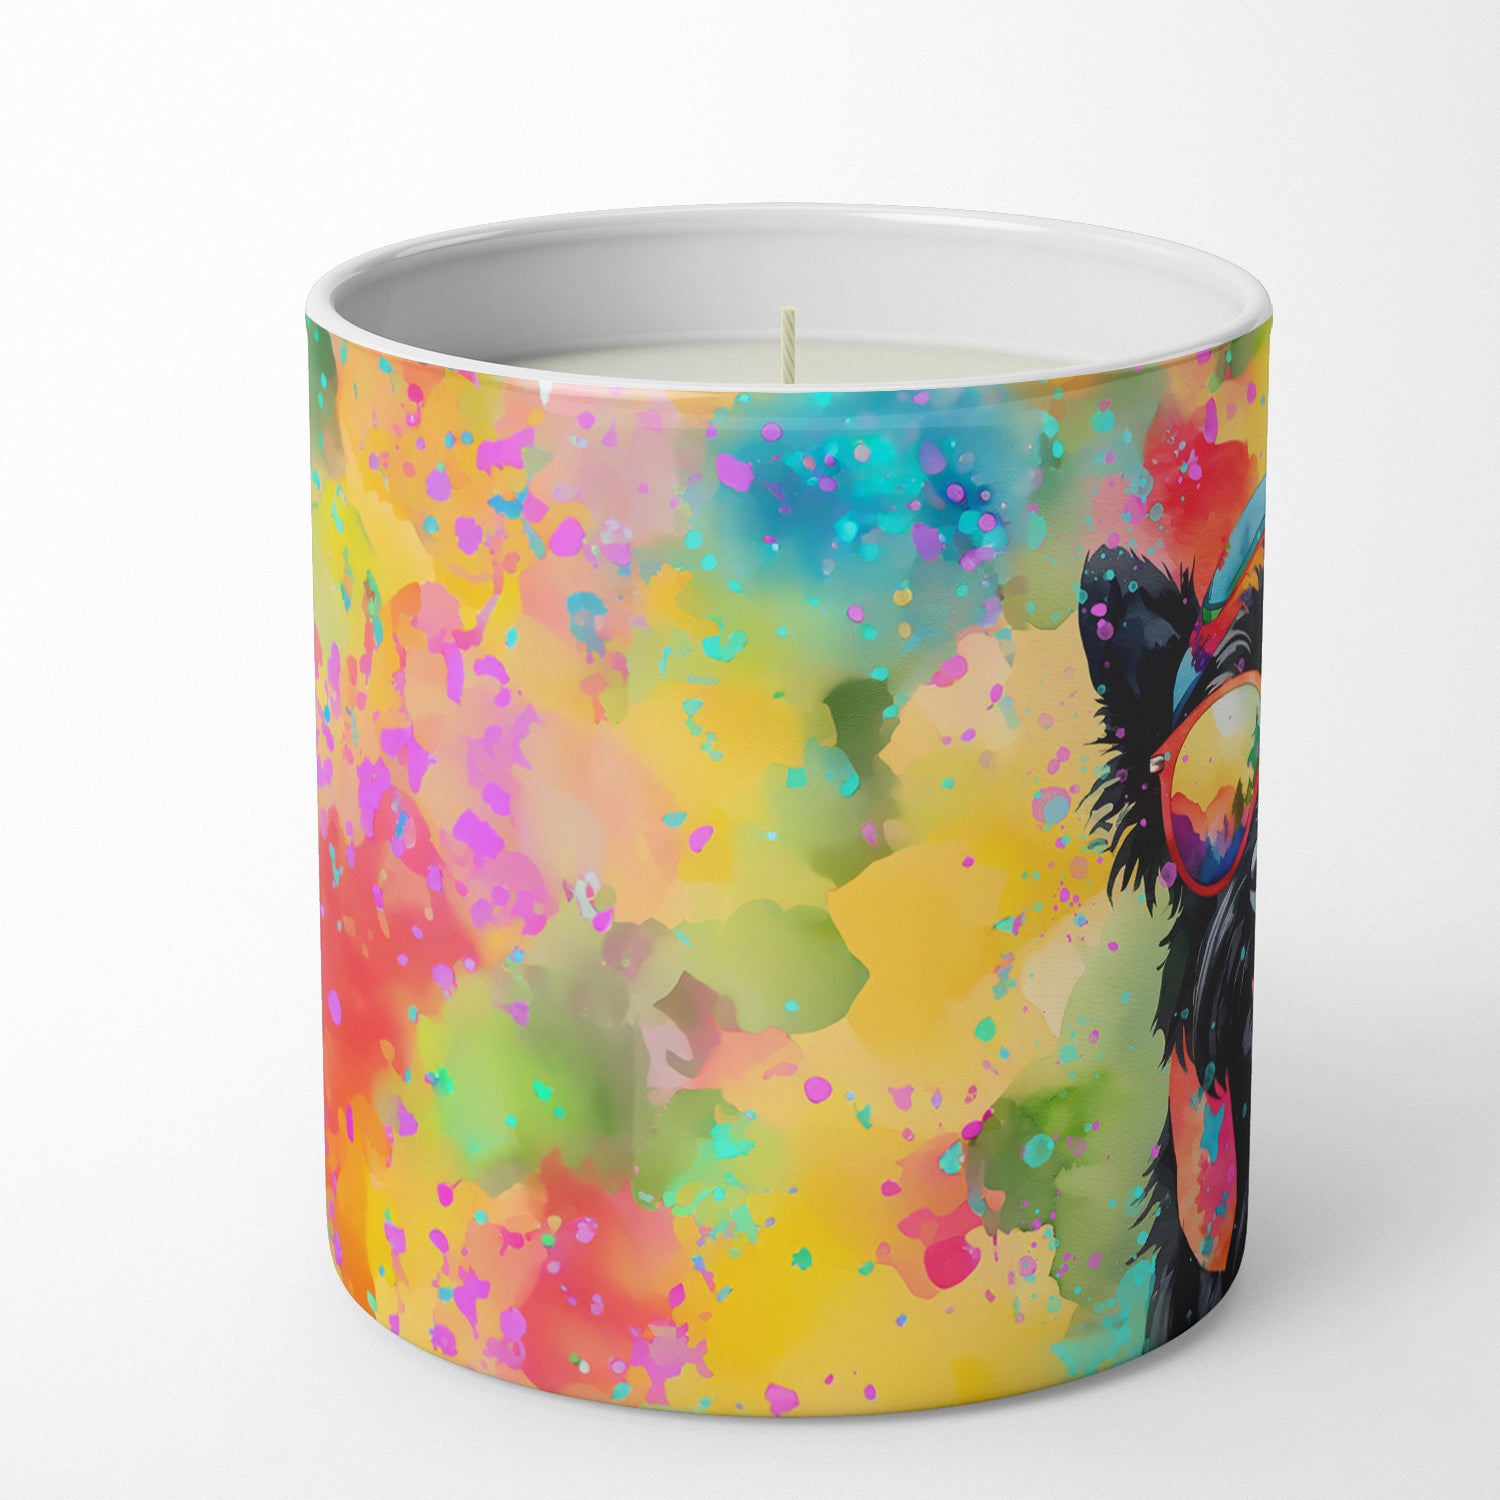 Scottish Terrier Hippie Dawg Decorative Soy Candle